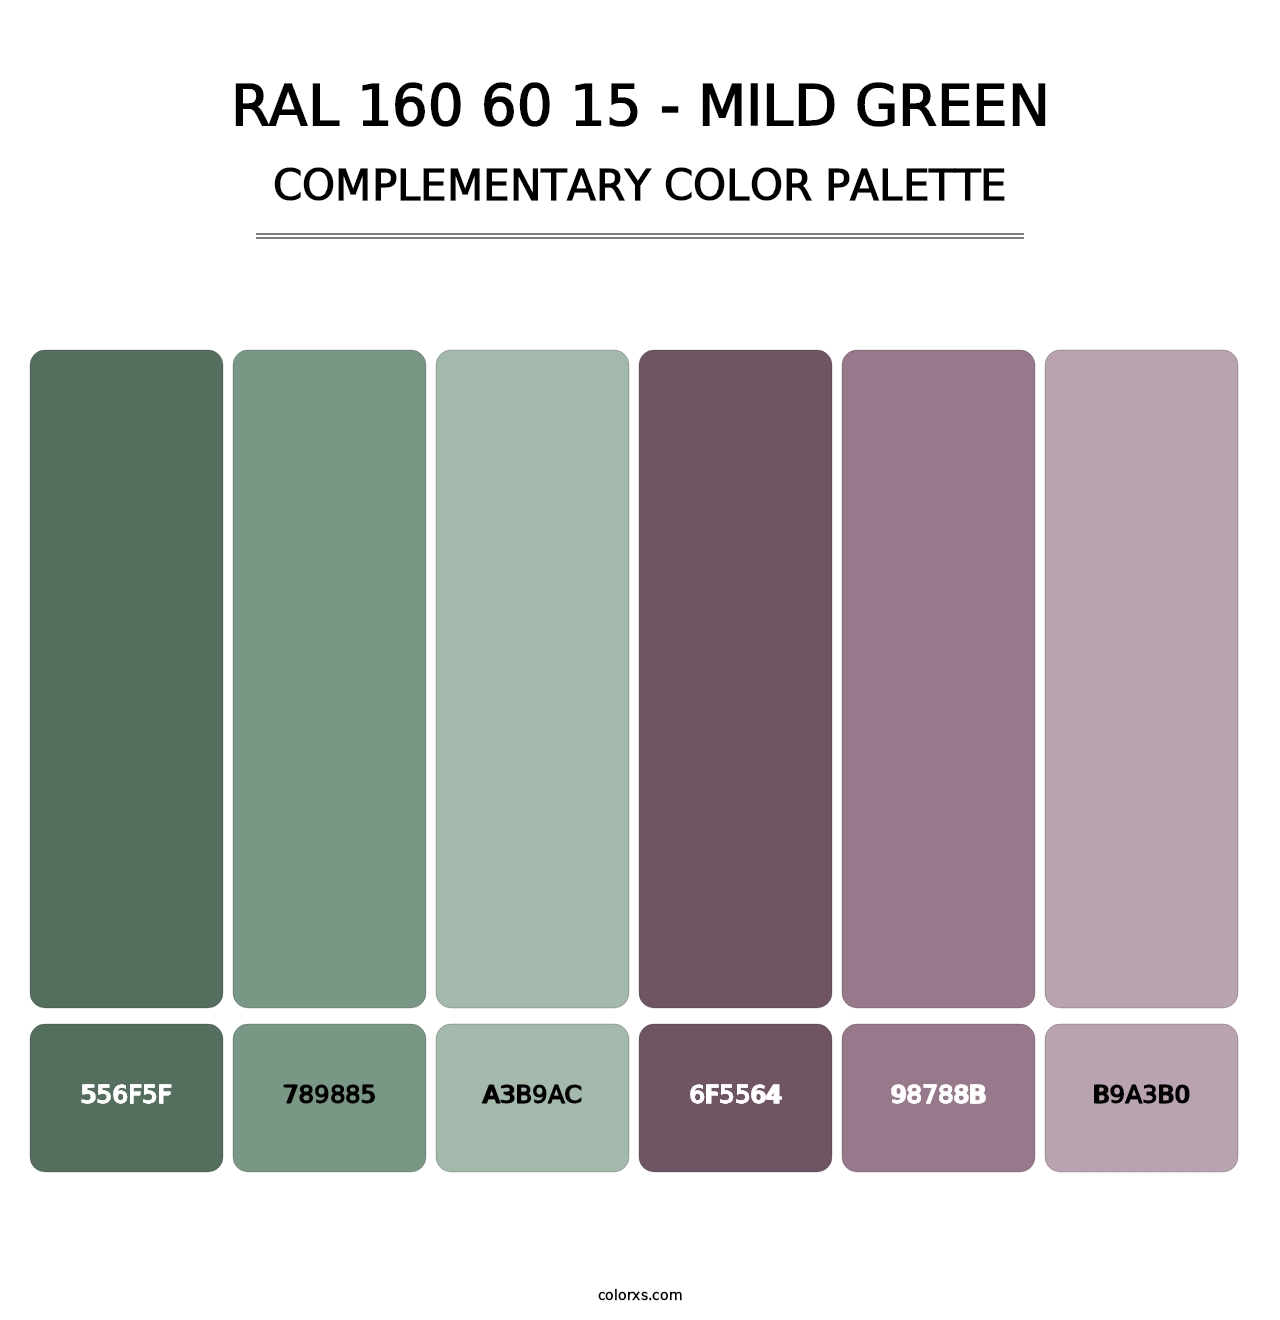 RAL 160 60 15 - Mild Green - Complementary Color Palette